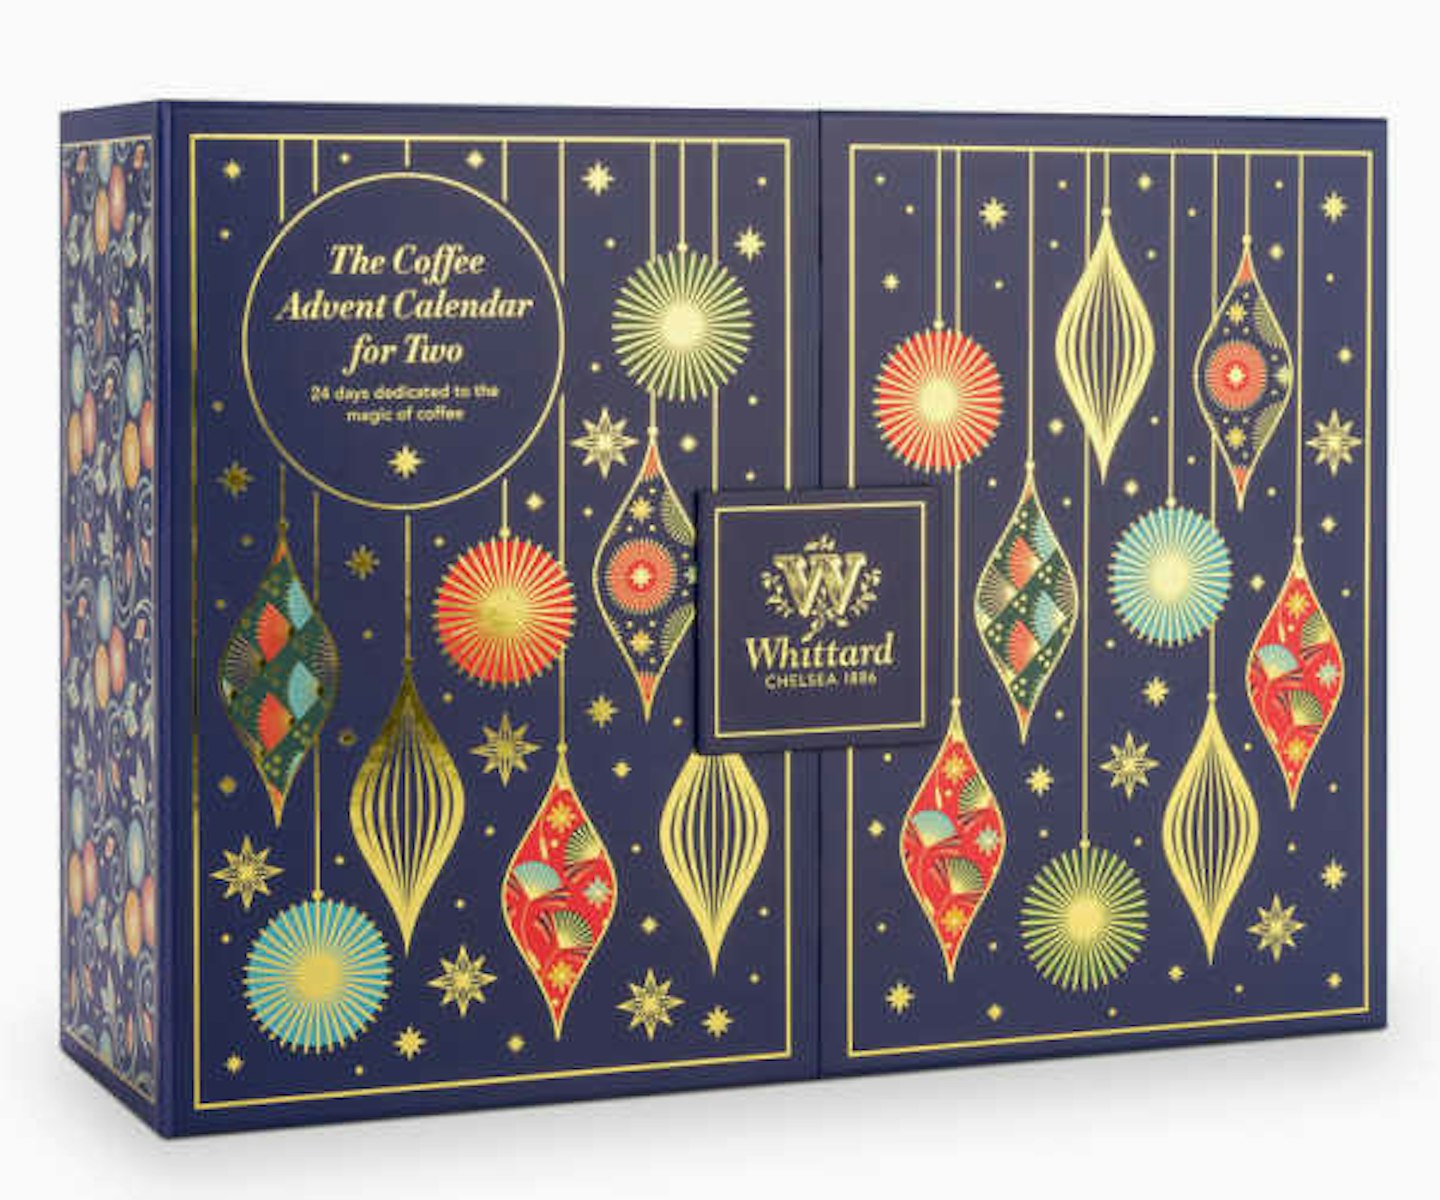 The Coffee Advent Calendar for Two